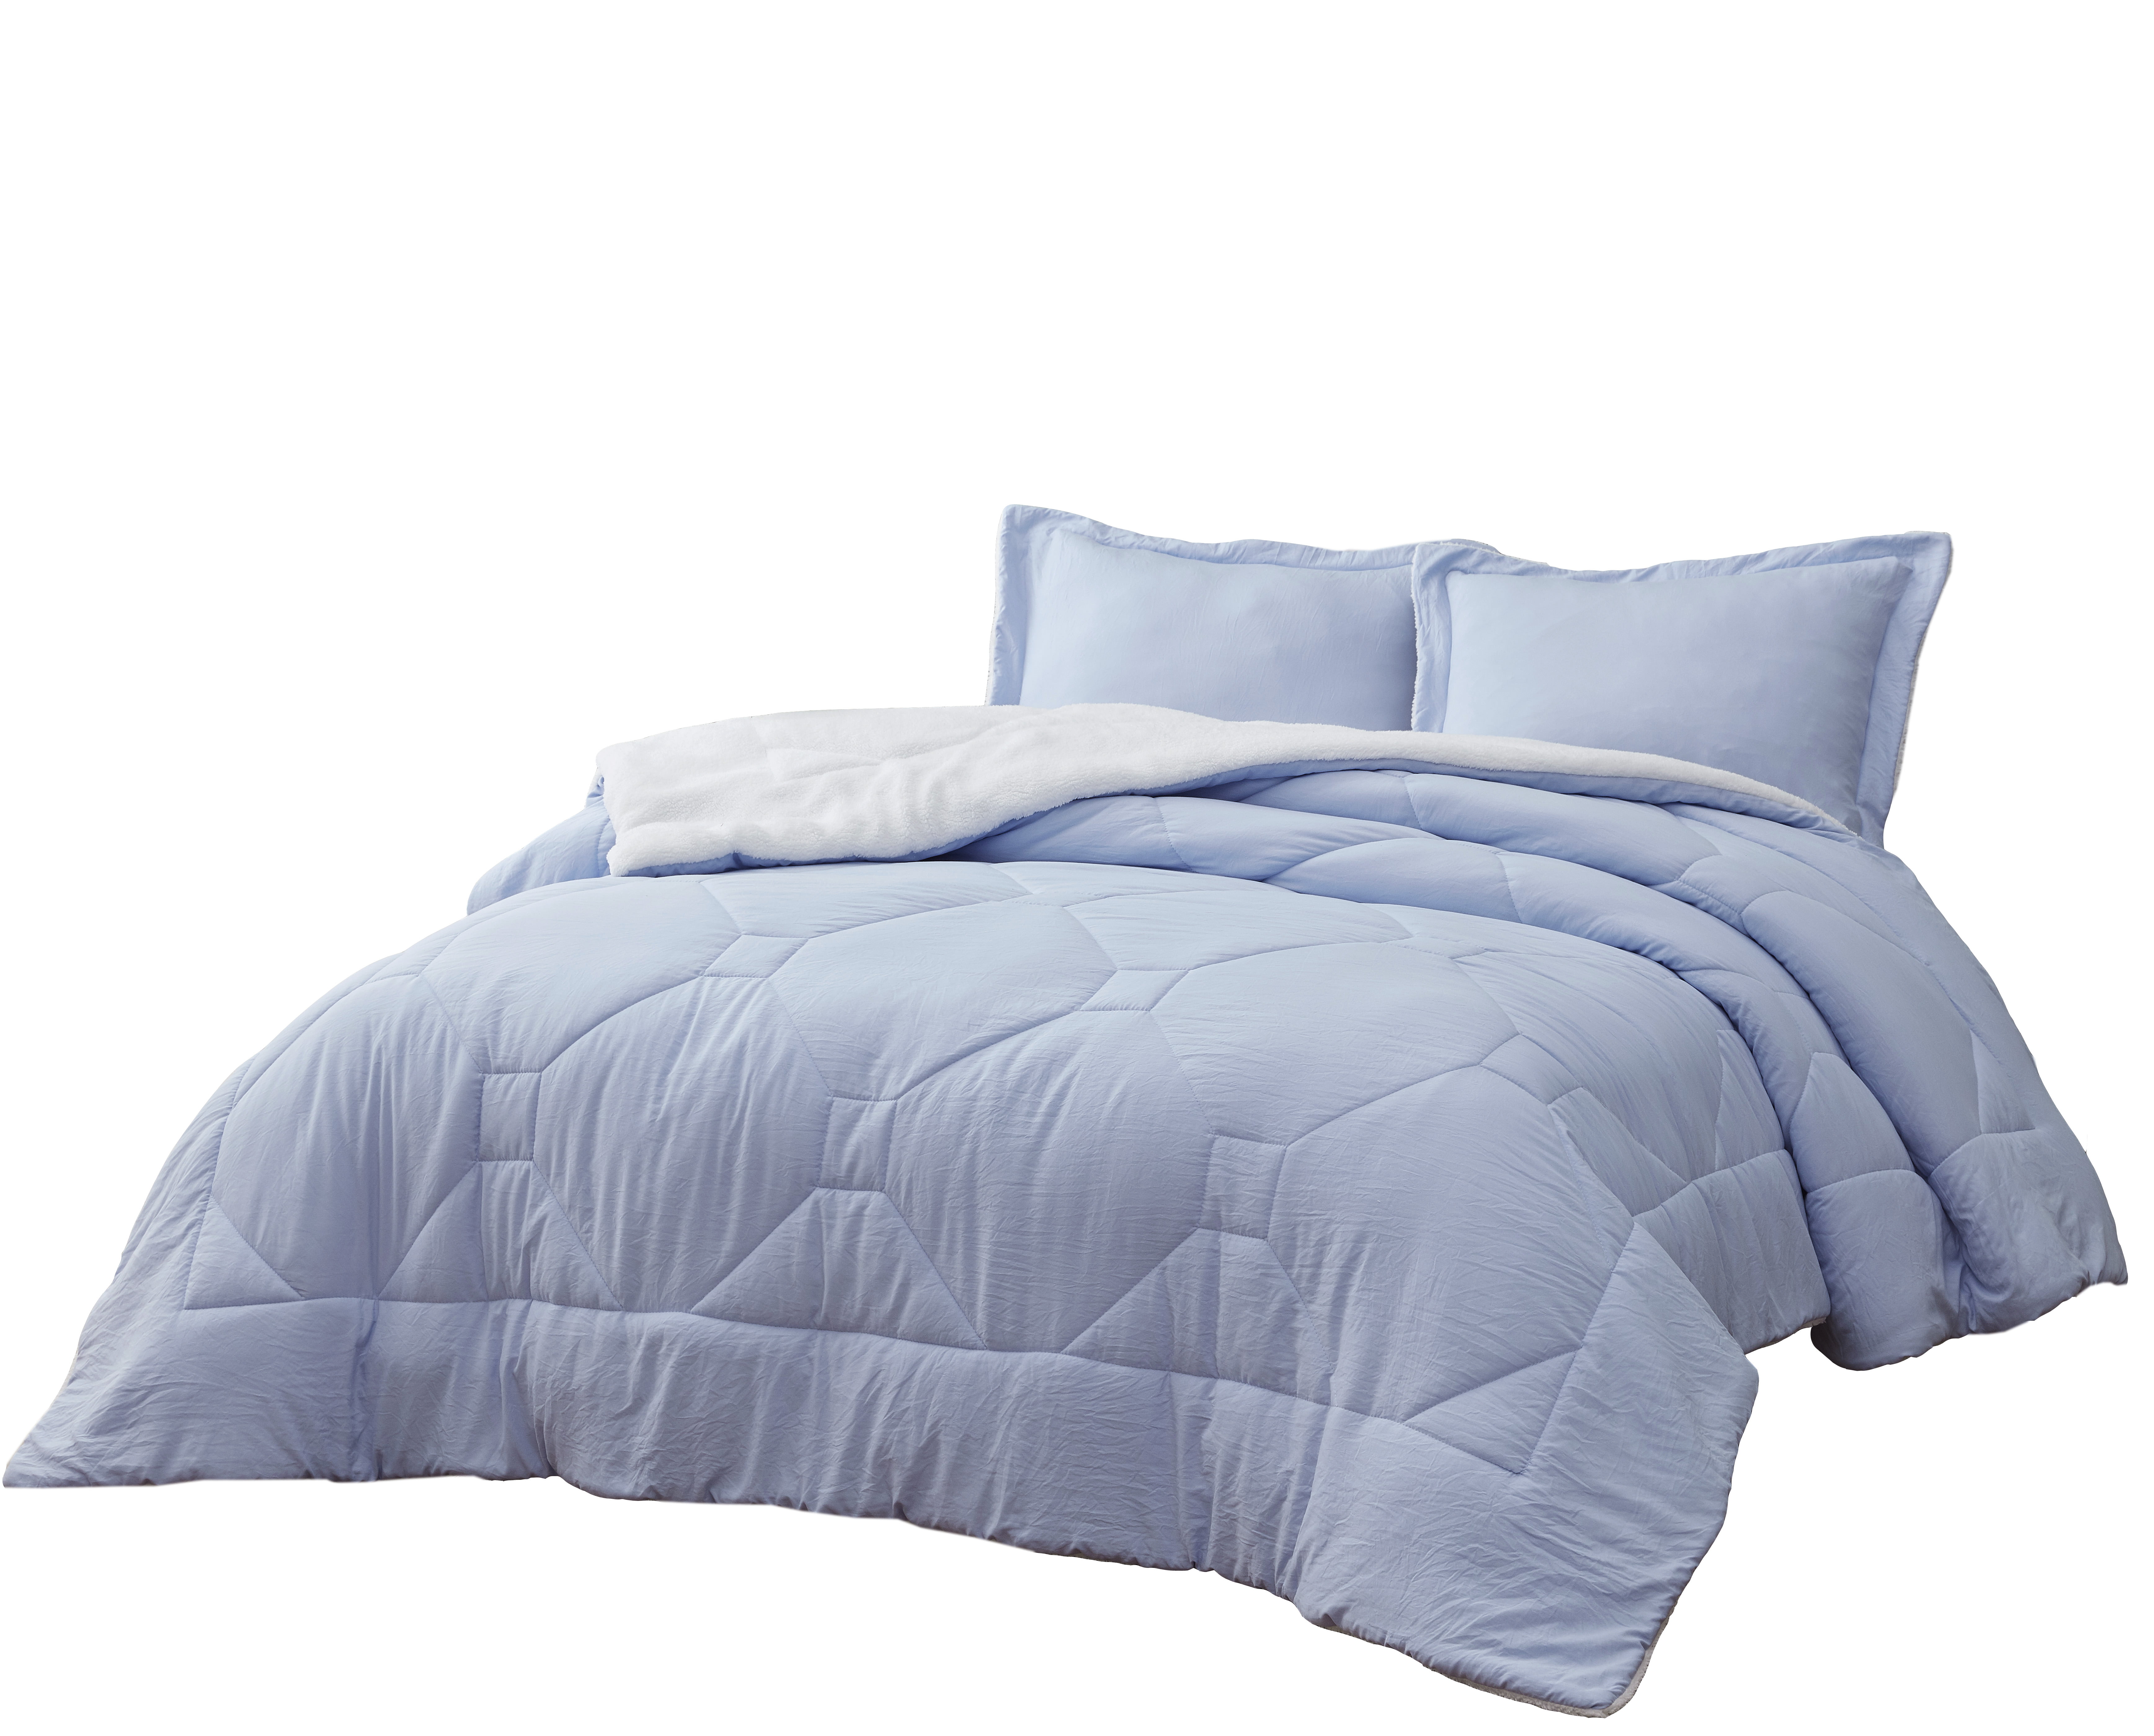 Cozy Beddings 2pc Comforter Set Quilted, Light Blue Duvet Cover Twin Xl